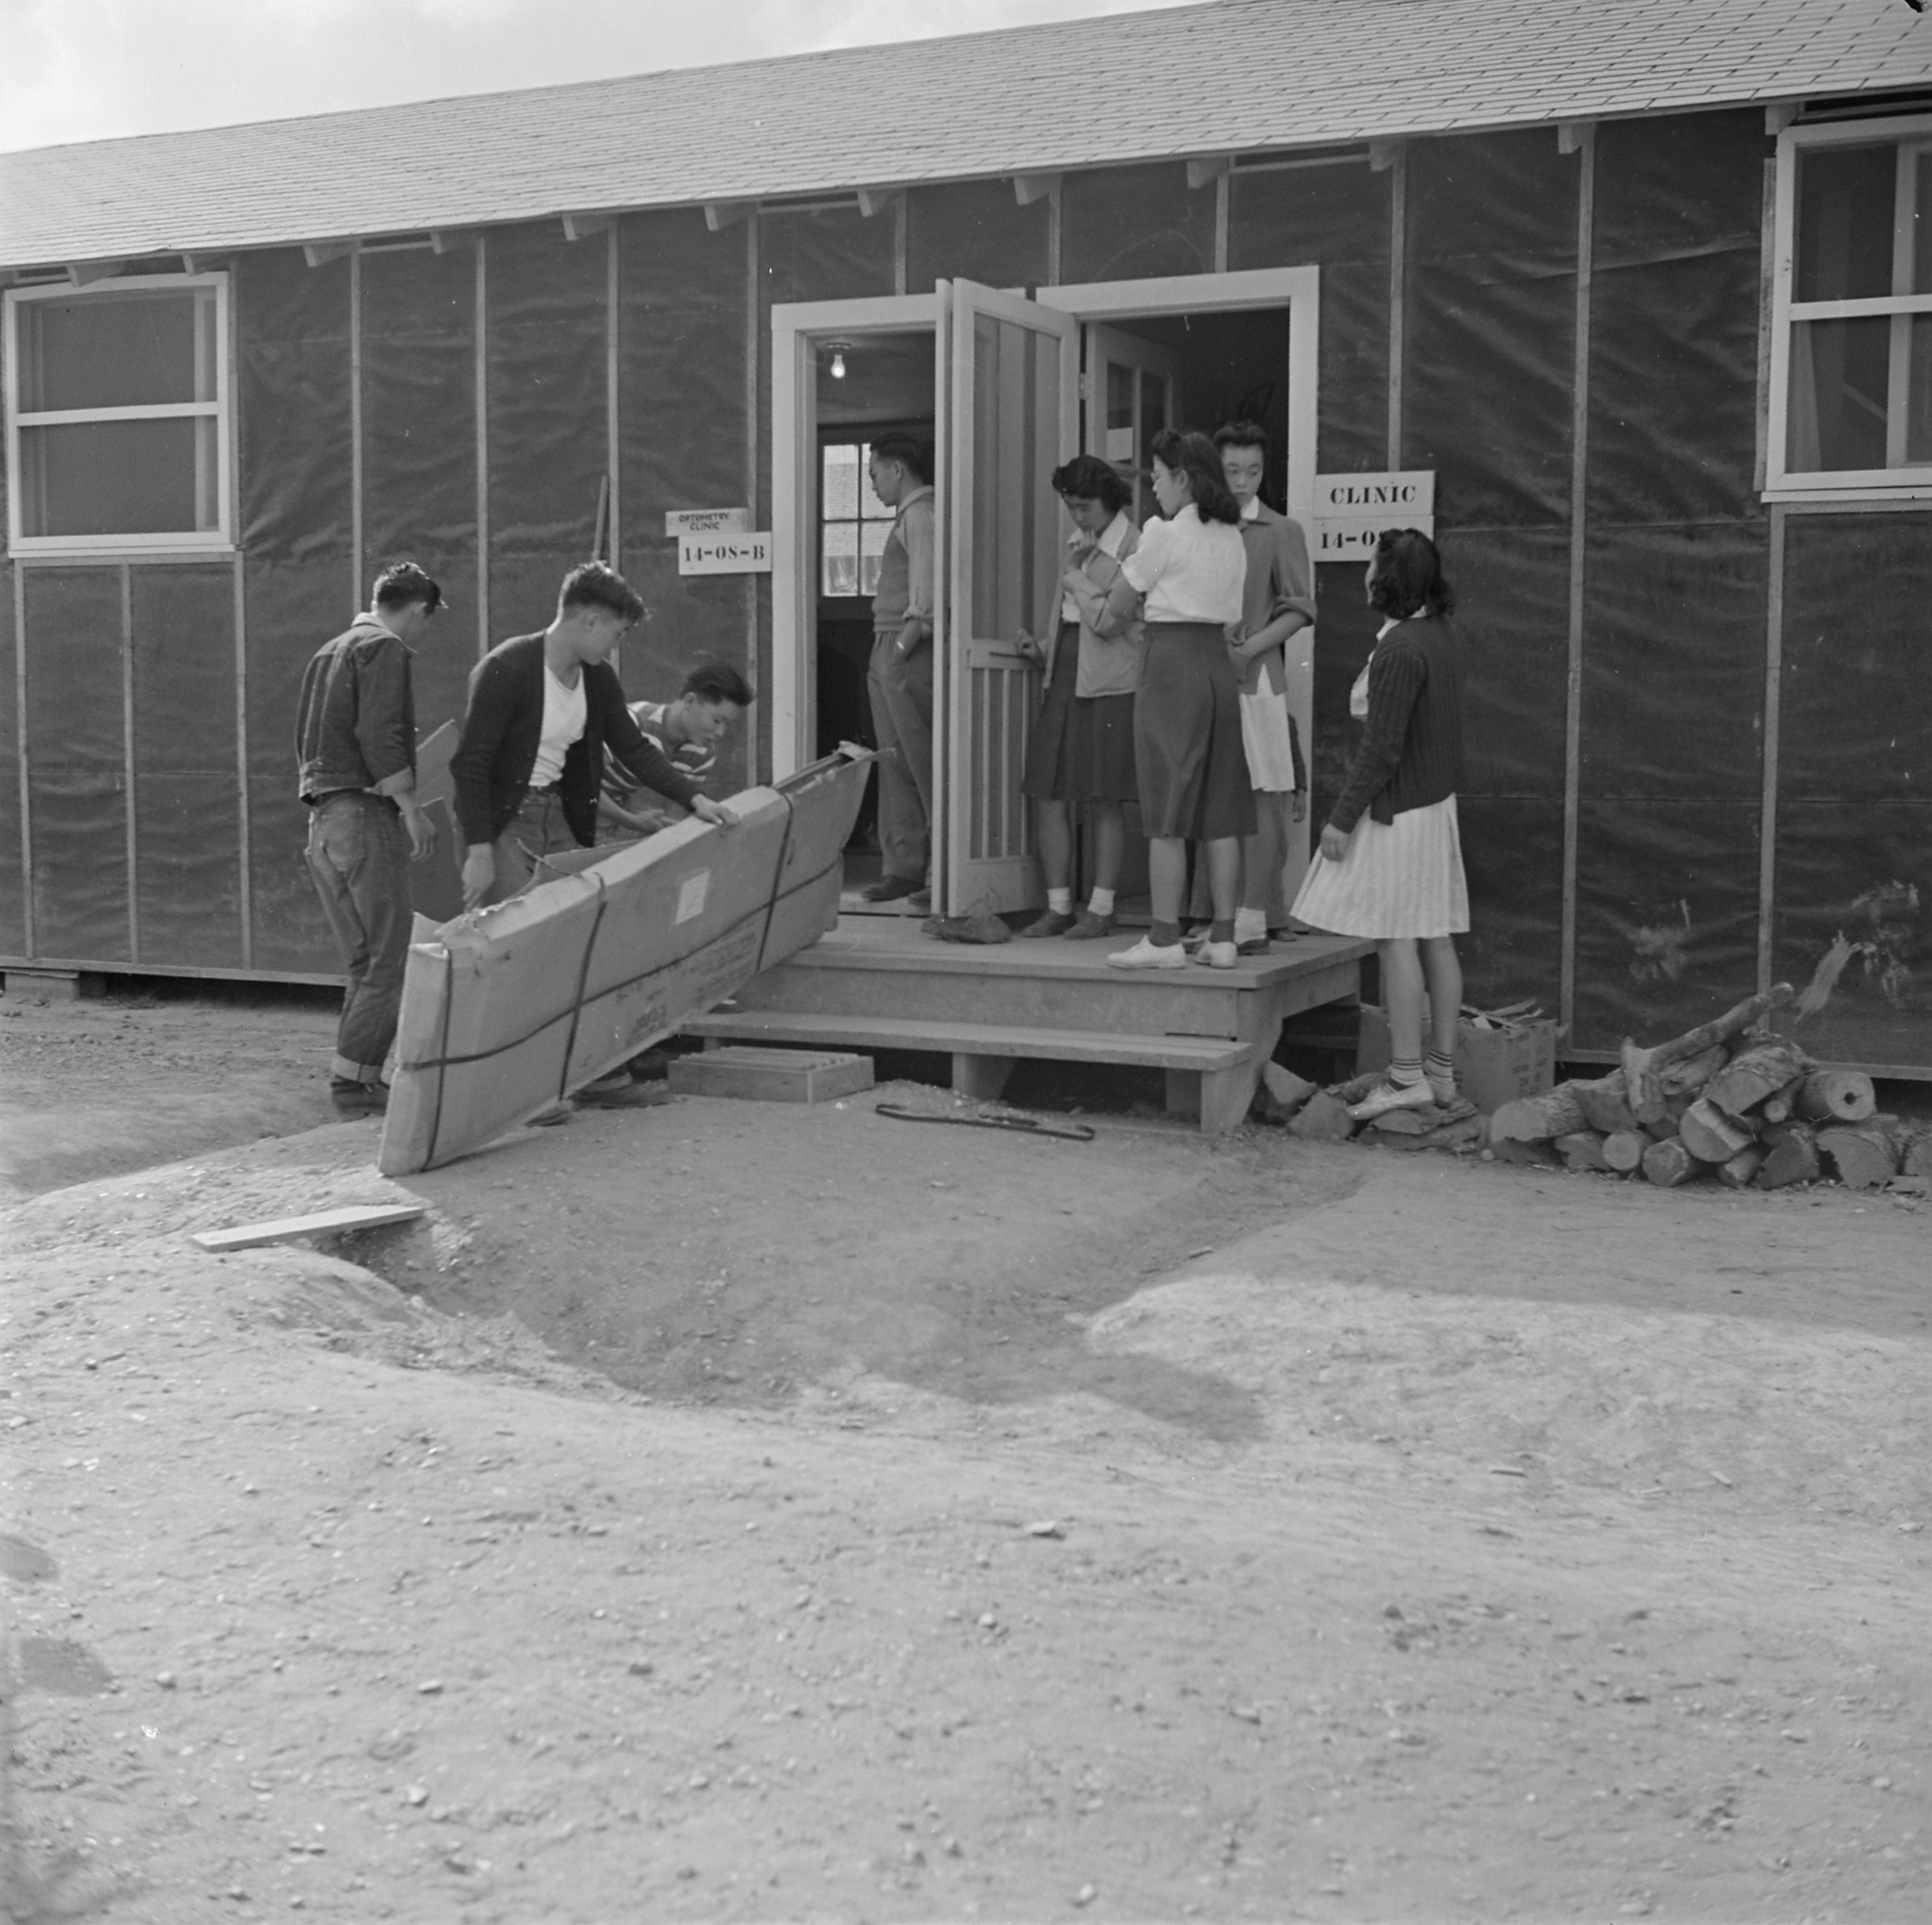 Medical and optometry building, Jerome War Relocation Center, Arkansas, United States, 17 Nov 1942